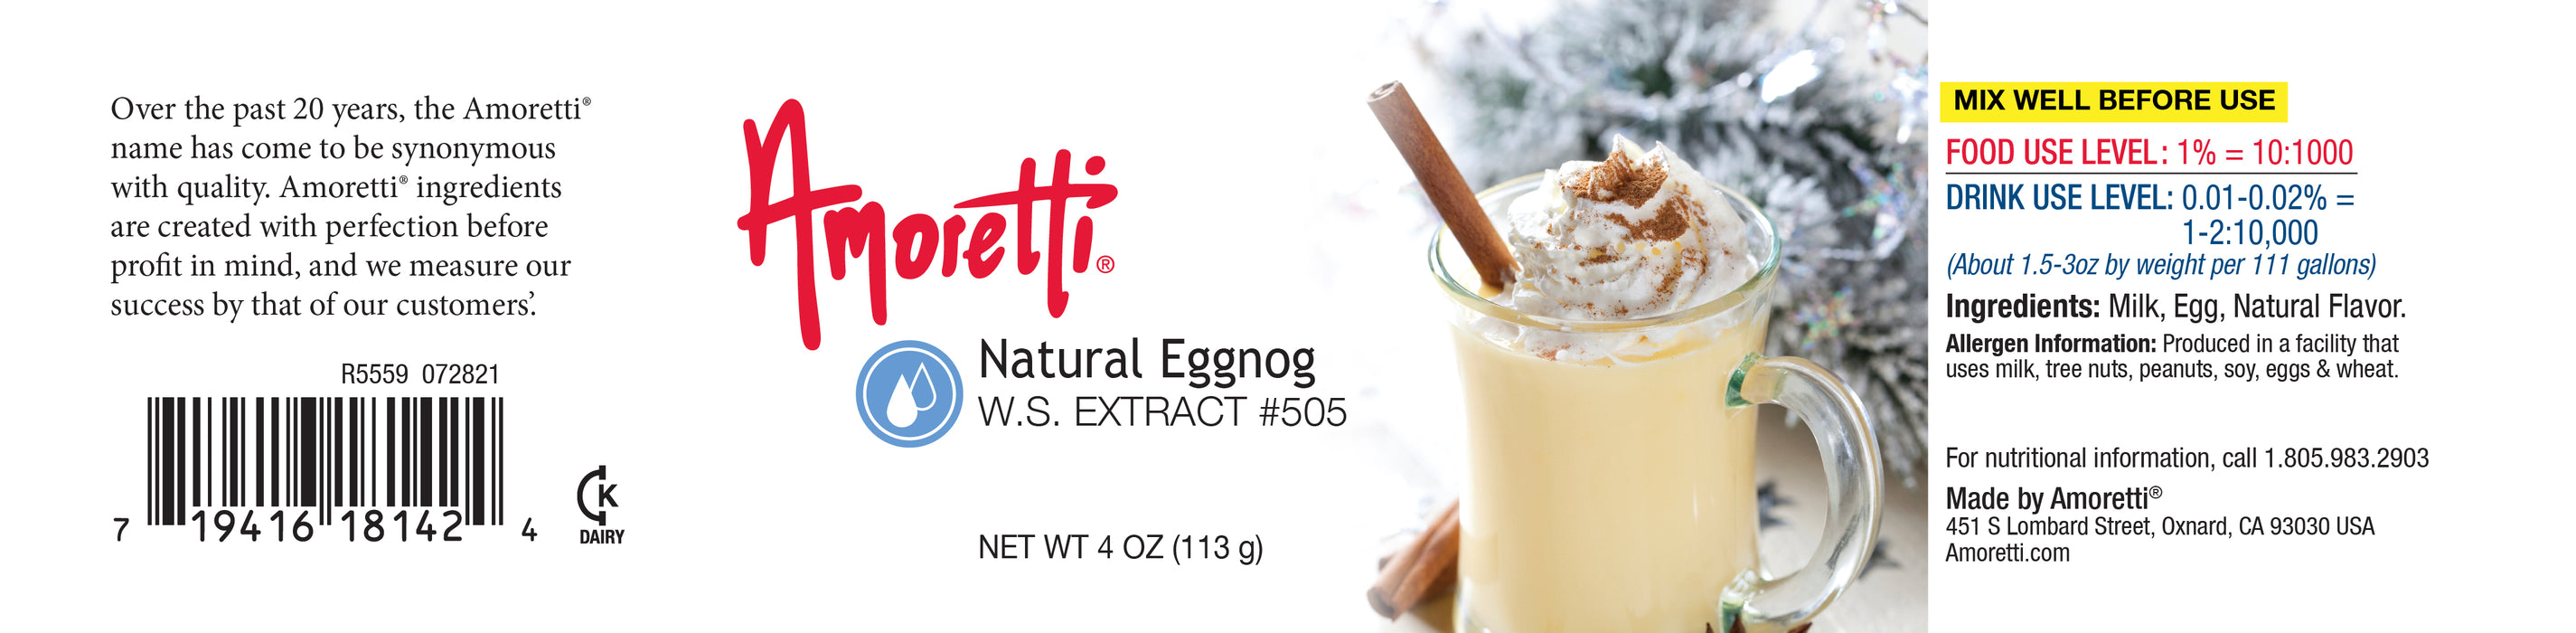 Natural Eggnog Extract Water Soluble